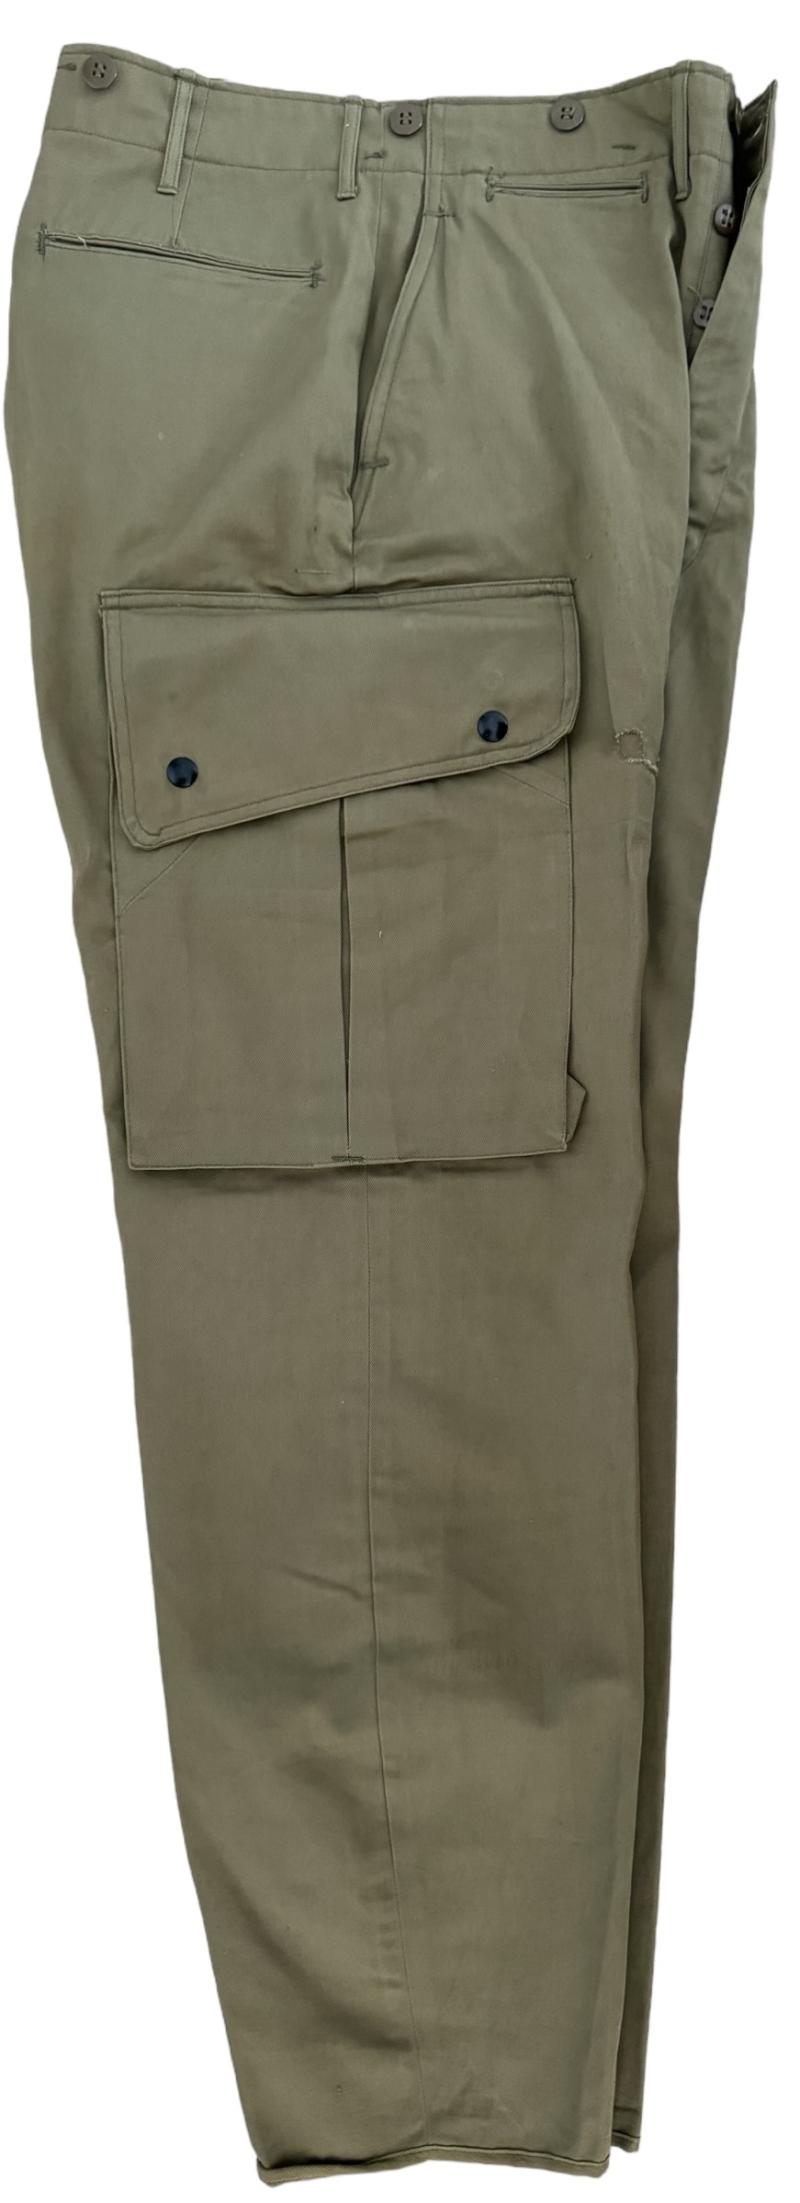 U.S. Airborne M1942 Jump Trousers - Unissued Condition